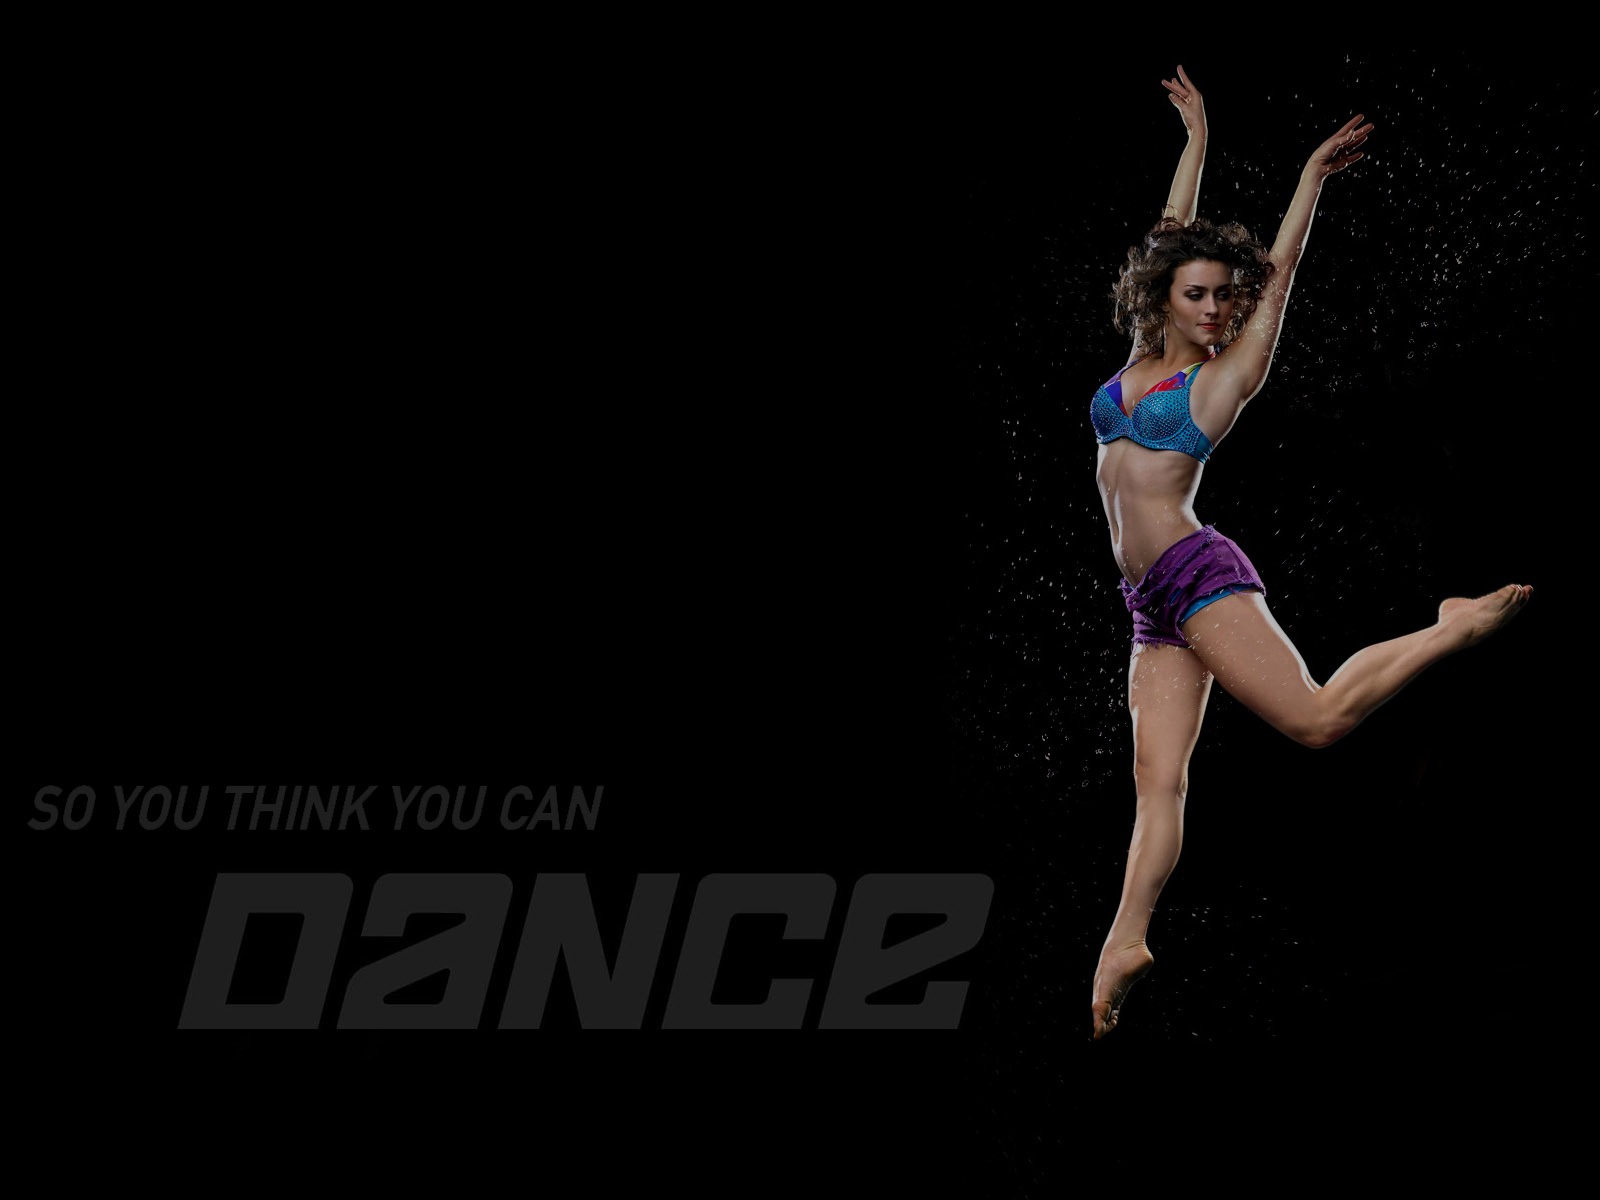 So You Think You Can Dance 舞林争霸 壁纸(二)5 - 1600x1200